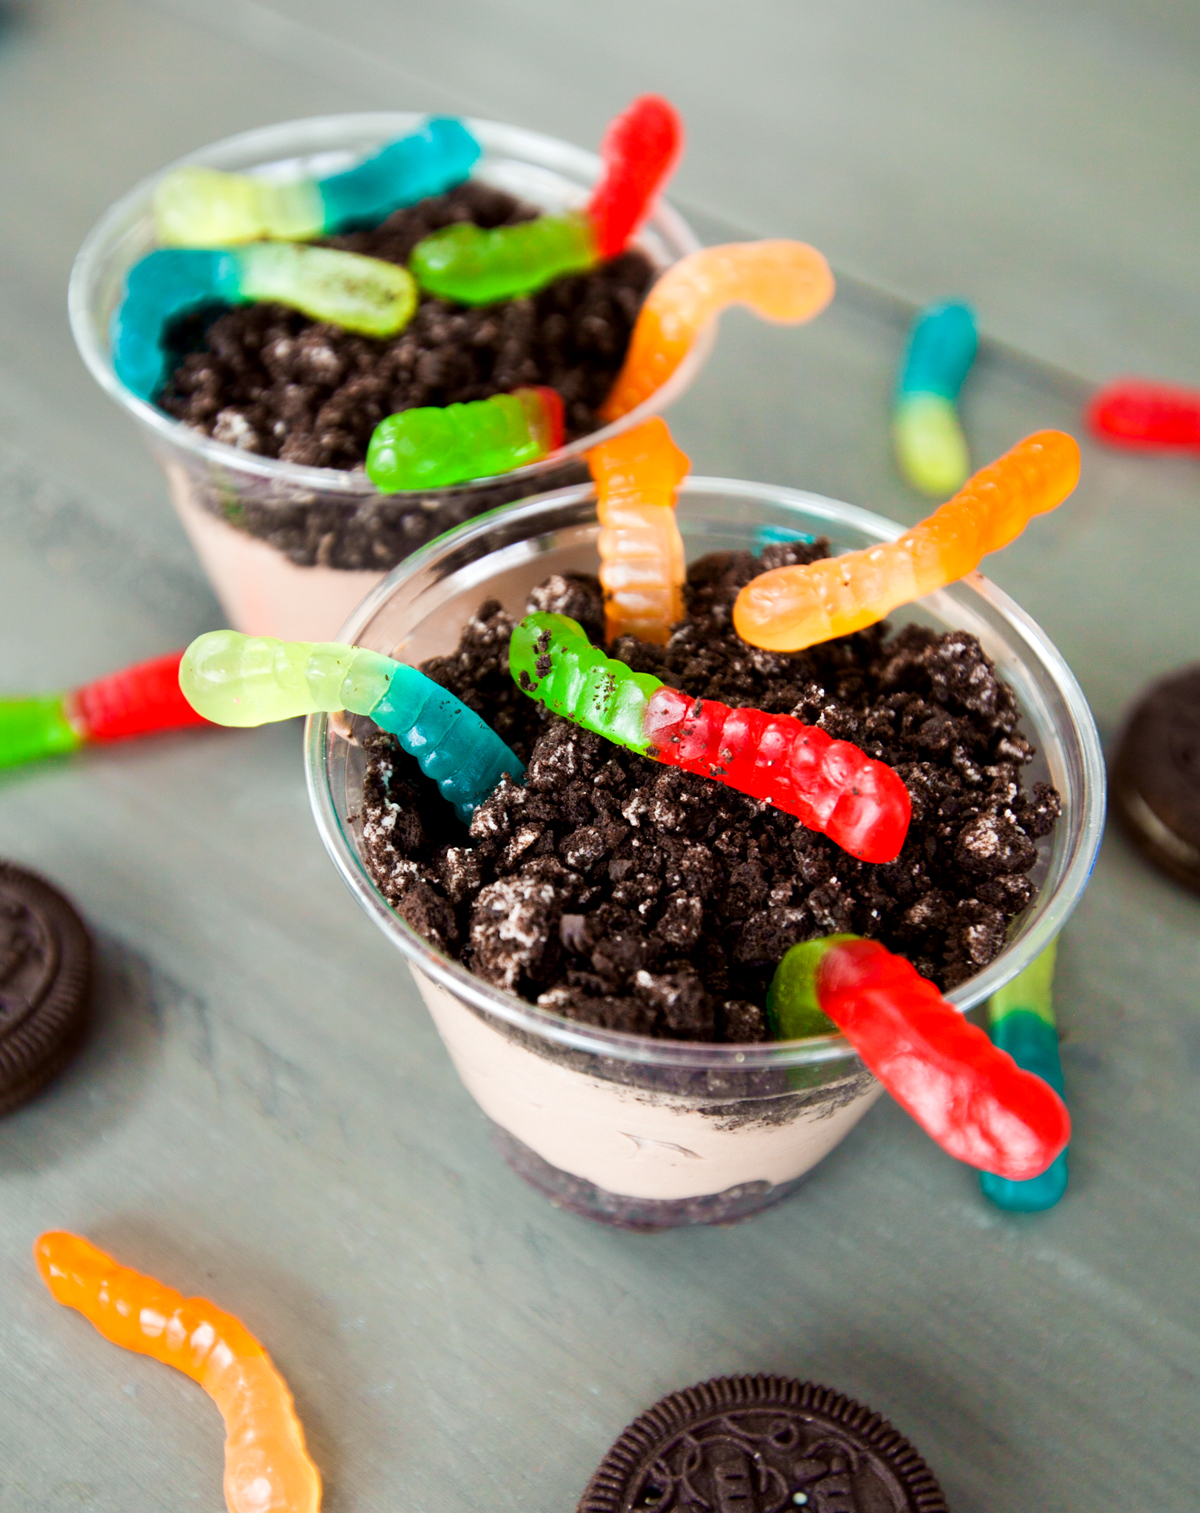 "Dirt and Worms" Dessert Cups